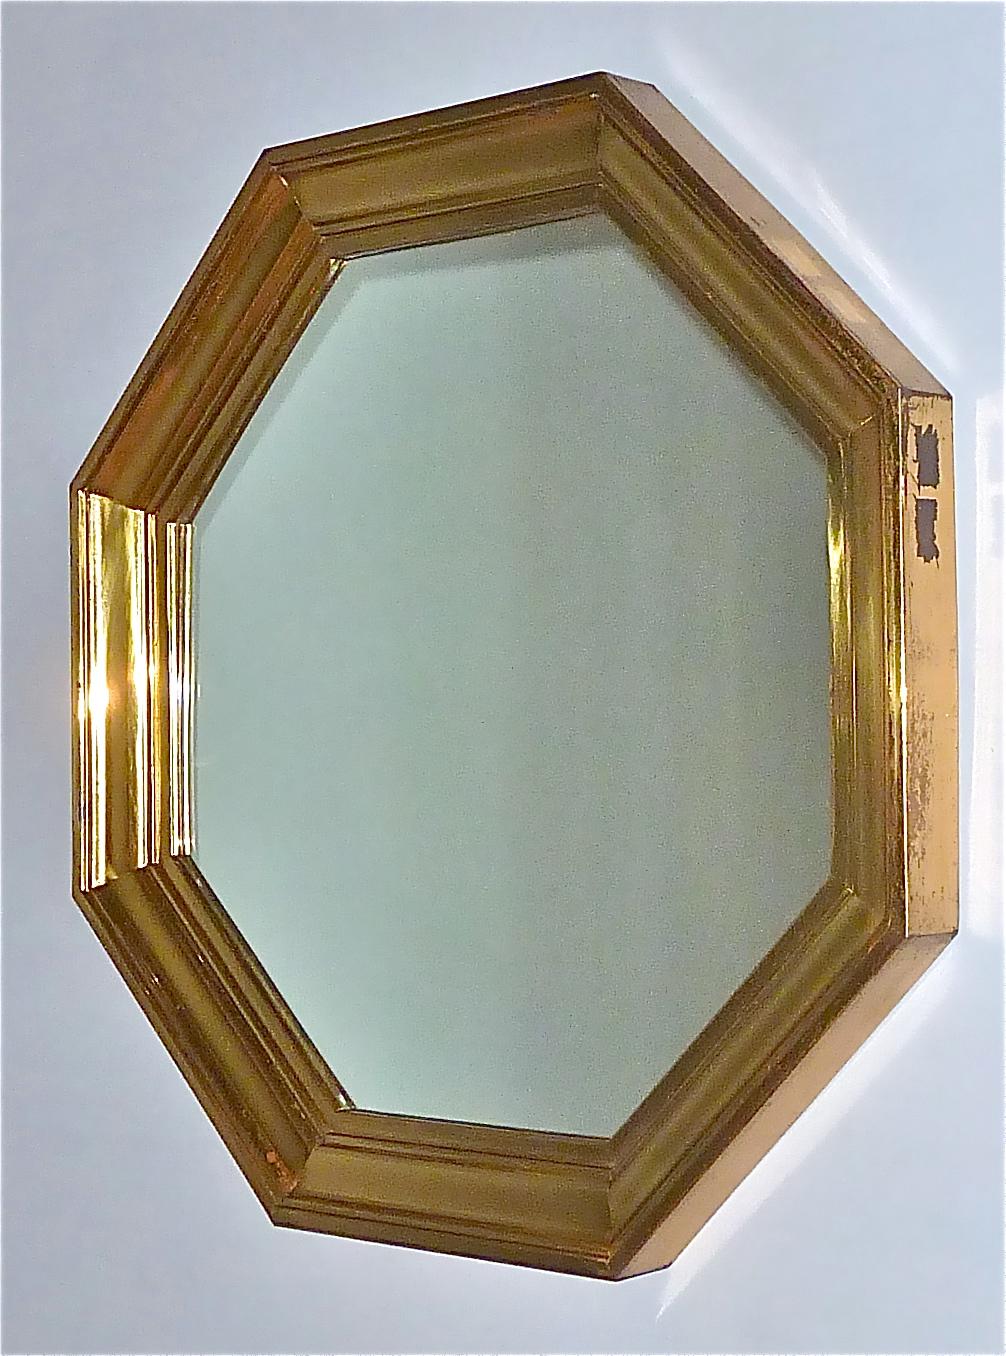 Large Maison Jansen Octagonal Patinated Brass Mirror Crespi Rizzo Style, 1970s For Sale 11